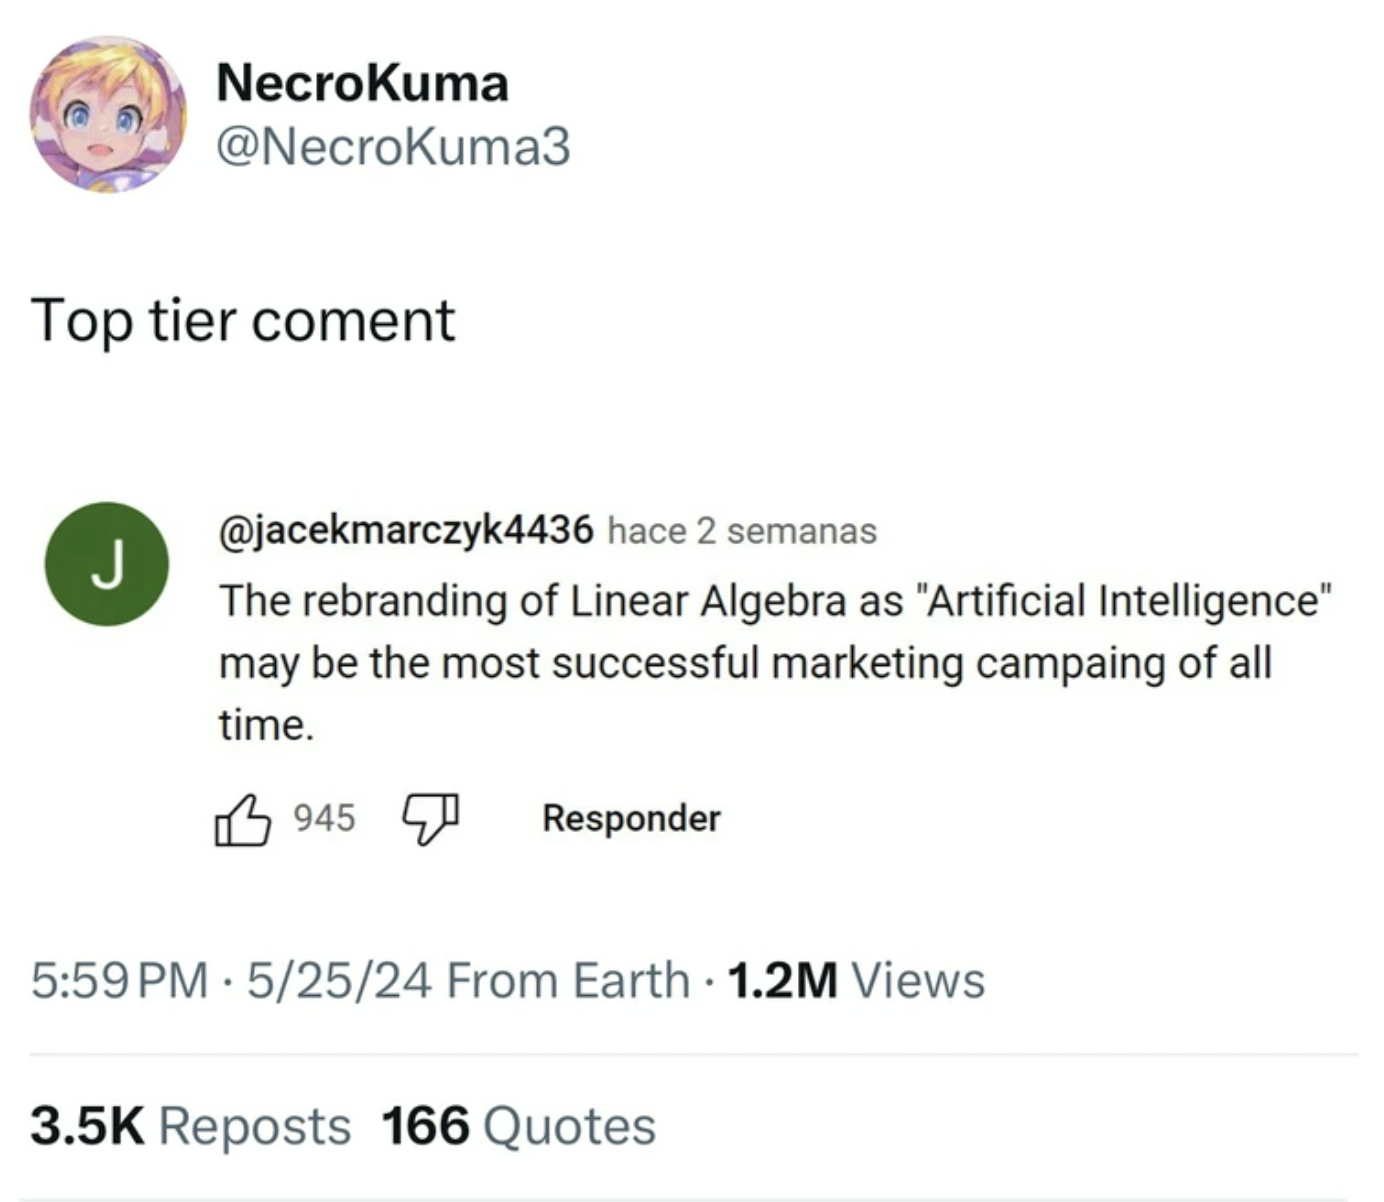 screenshot - NecroKuma Top tier coment J hace 2 semanas The rebranding of Linear Algebra as "Artificial Intelligence" may be the most successful marketing campaing of all time. 945 Responder 52524 From Earth 1.2M Views Reposts 166 Quotes